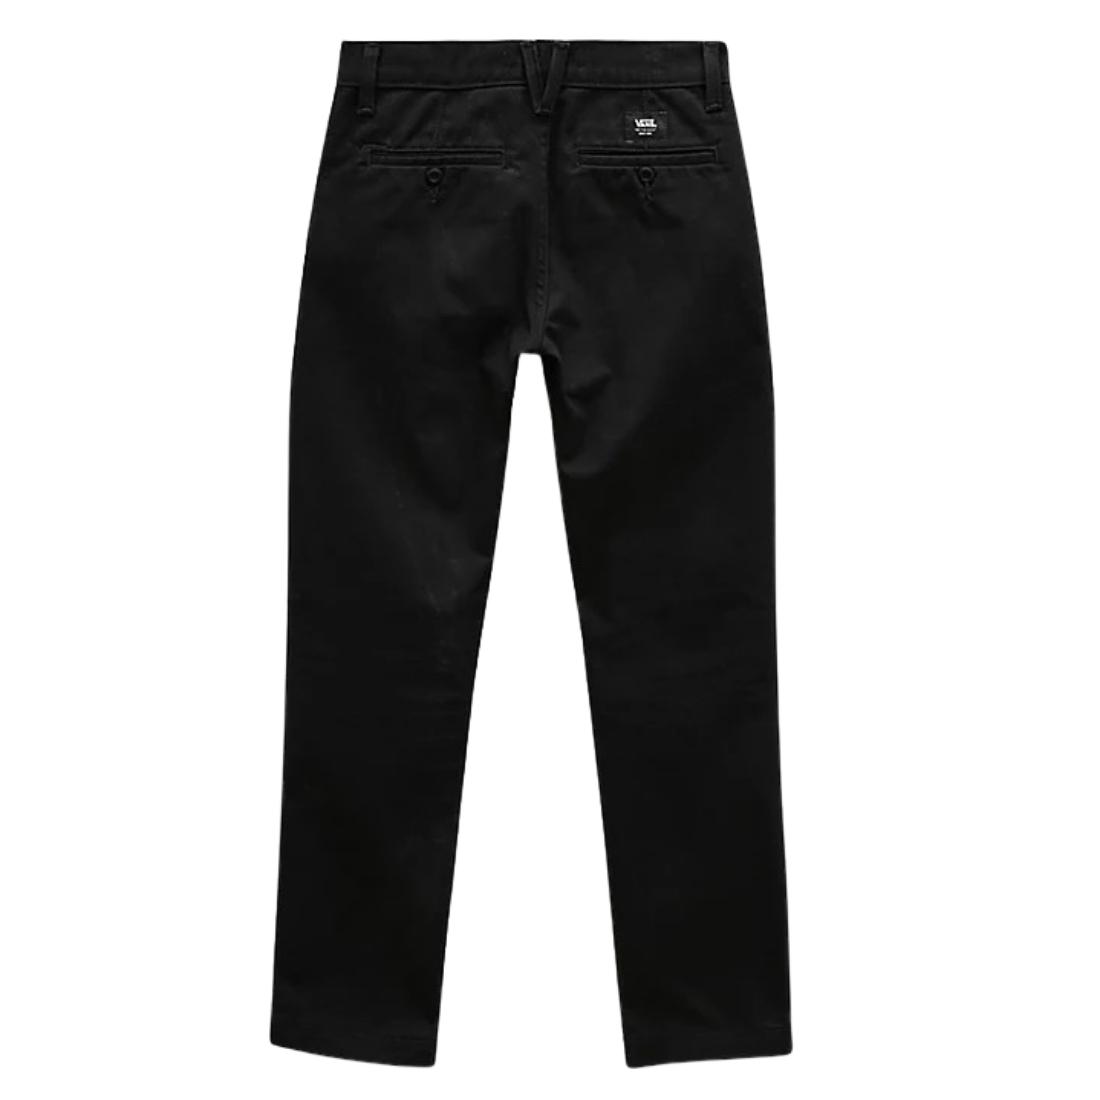 Authentic Chino Pant | Chino pants women, Chinos pants, Pants for women